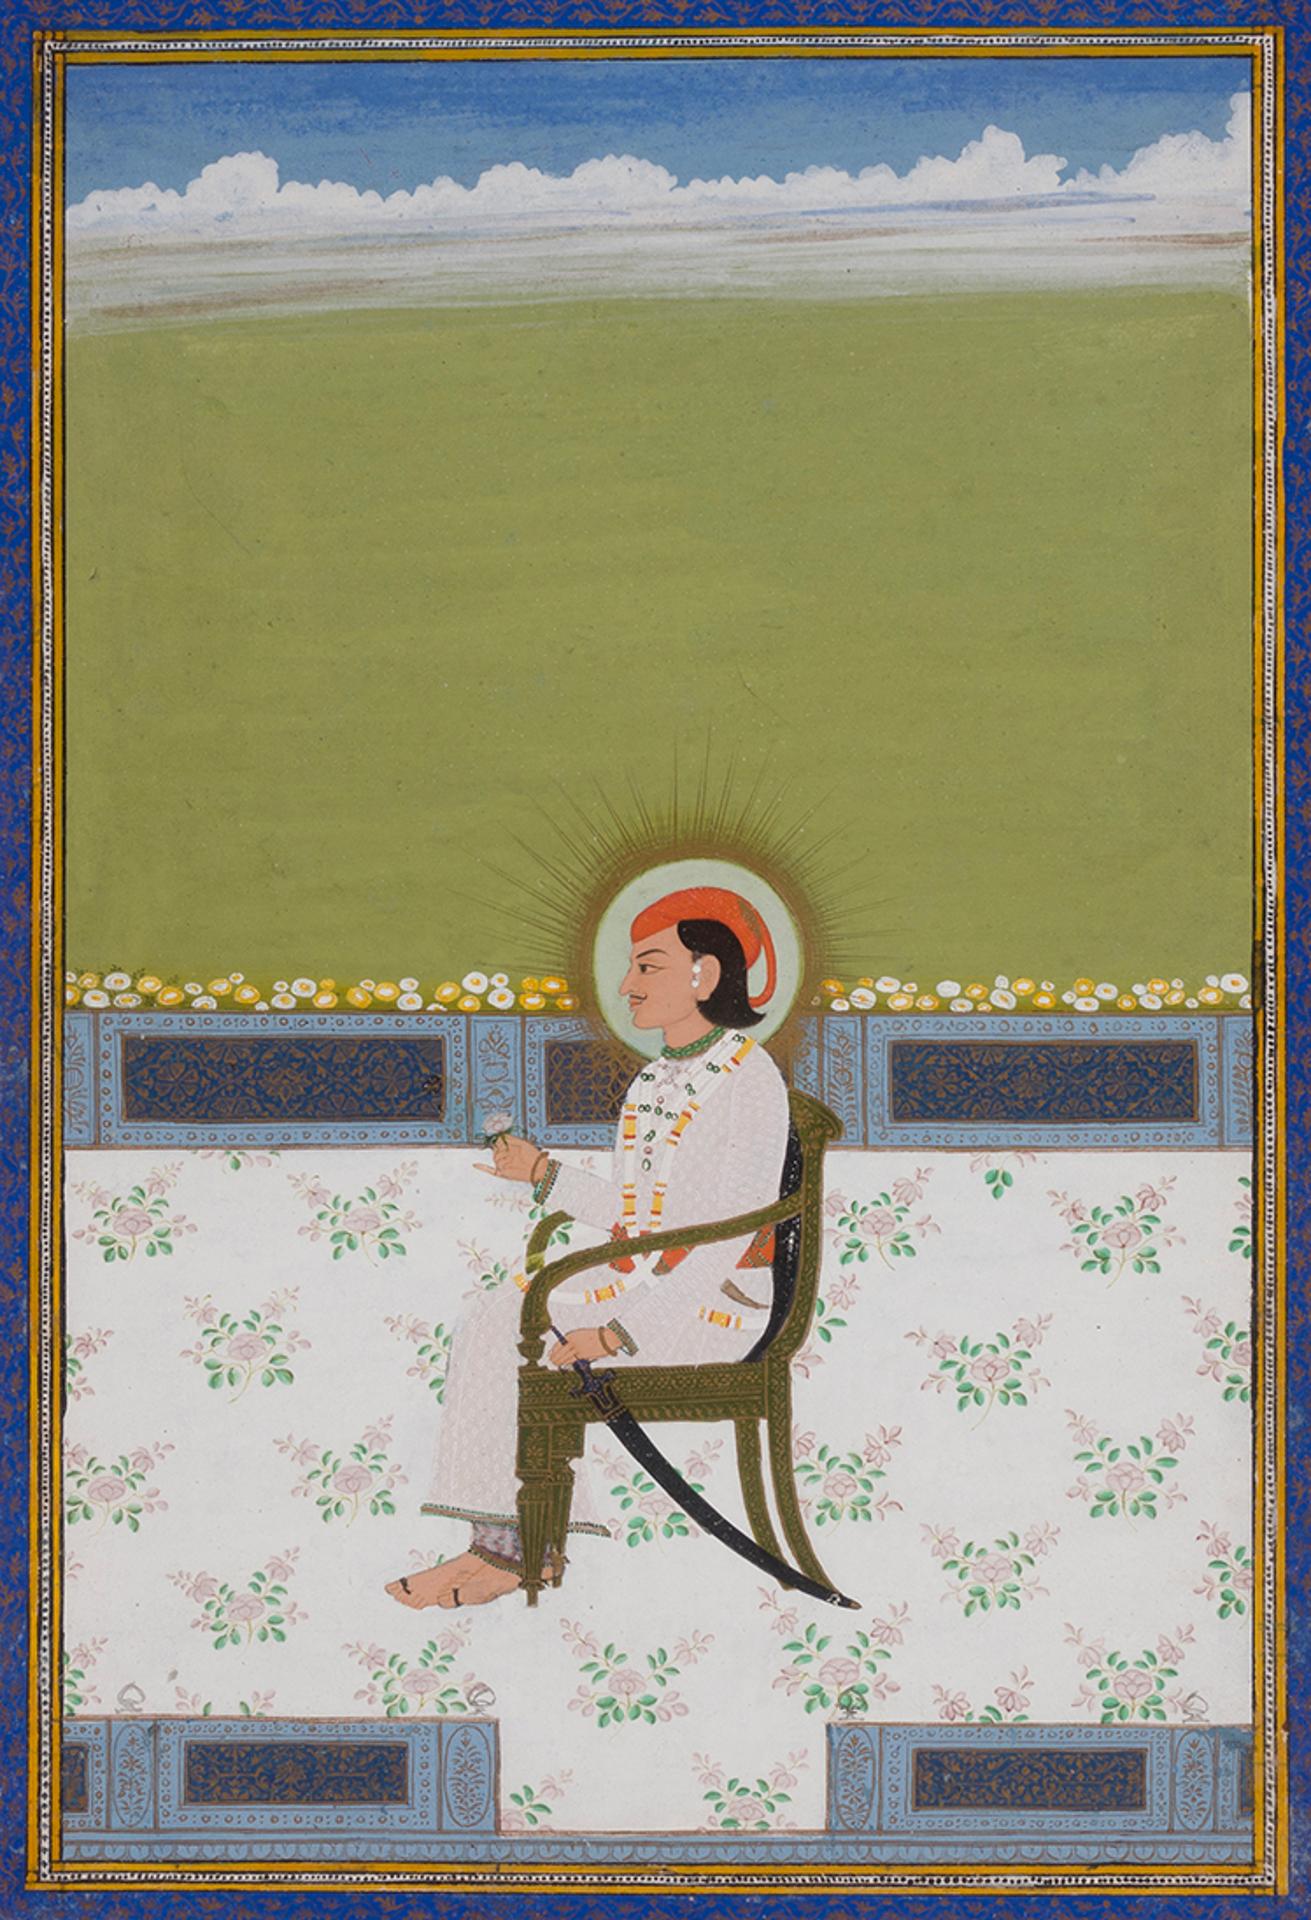 Indian Art - A Pahari (Possibly Kangra) Painting of a Prince, 18th/19th Century